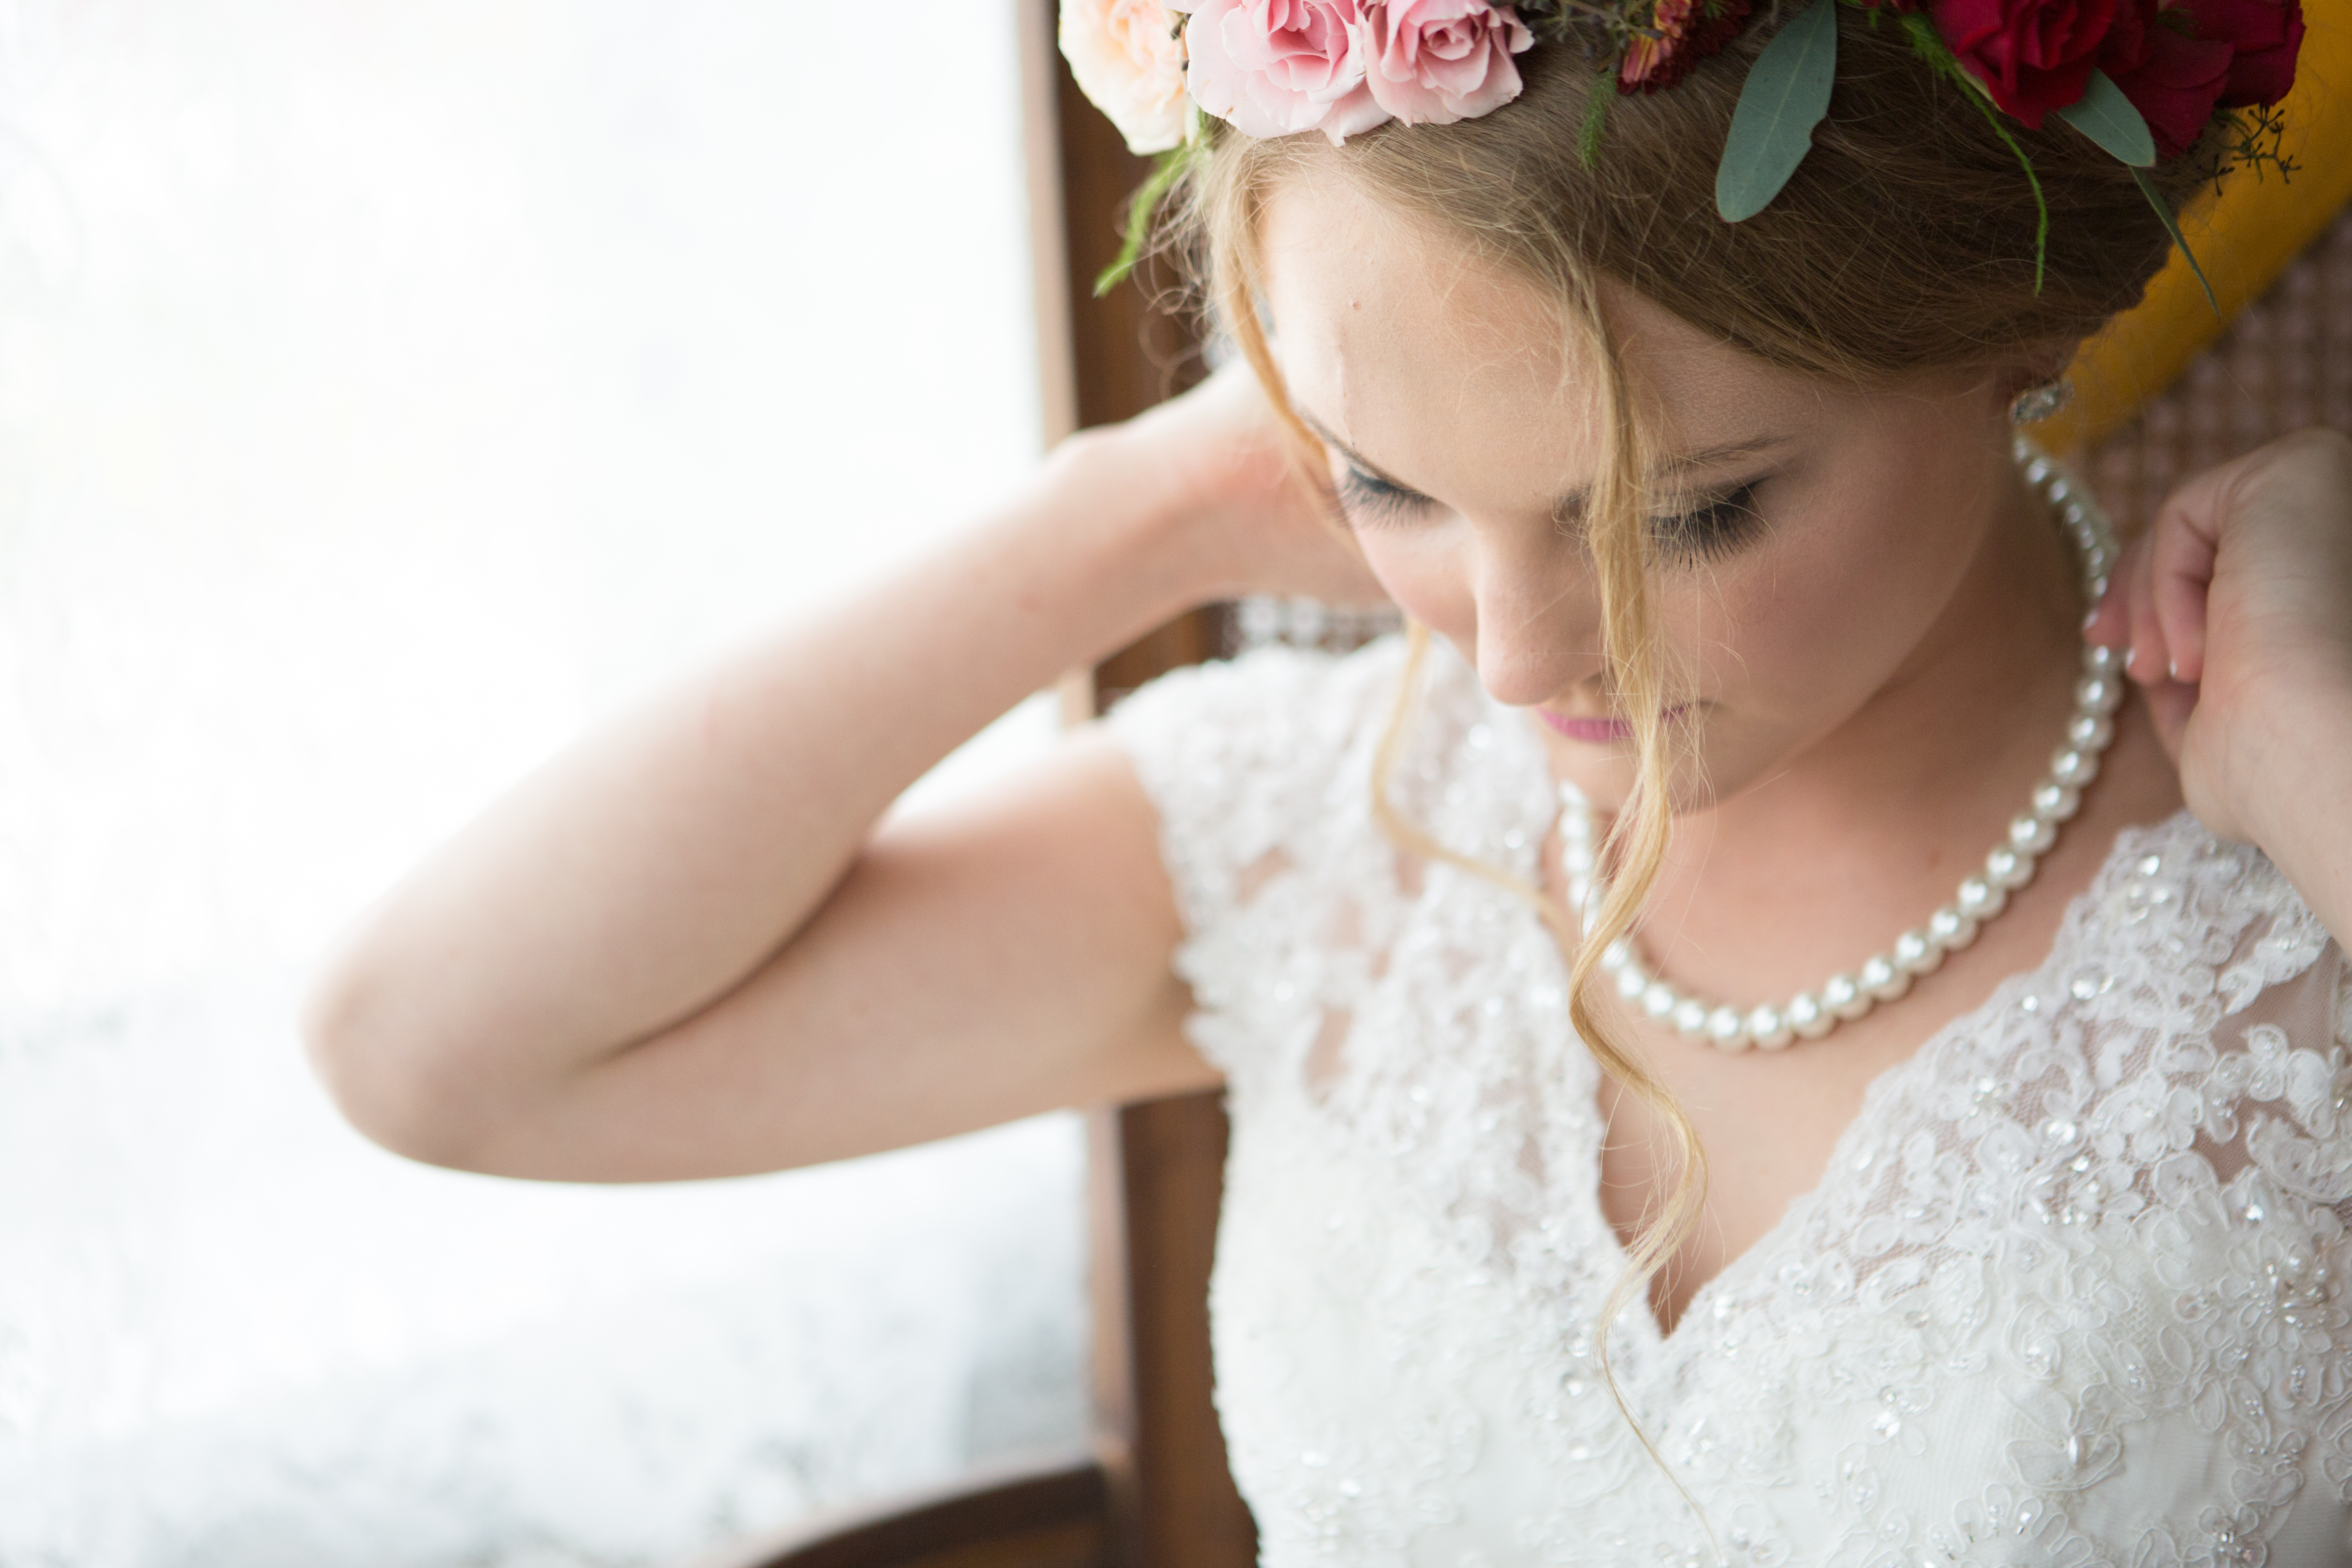 Pearl Wedding Necklace | The Day's Design | Hetler Photography